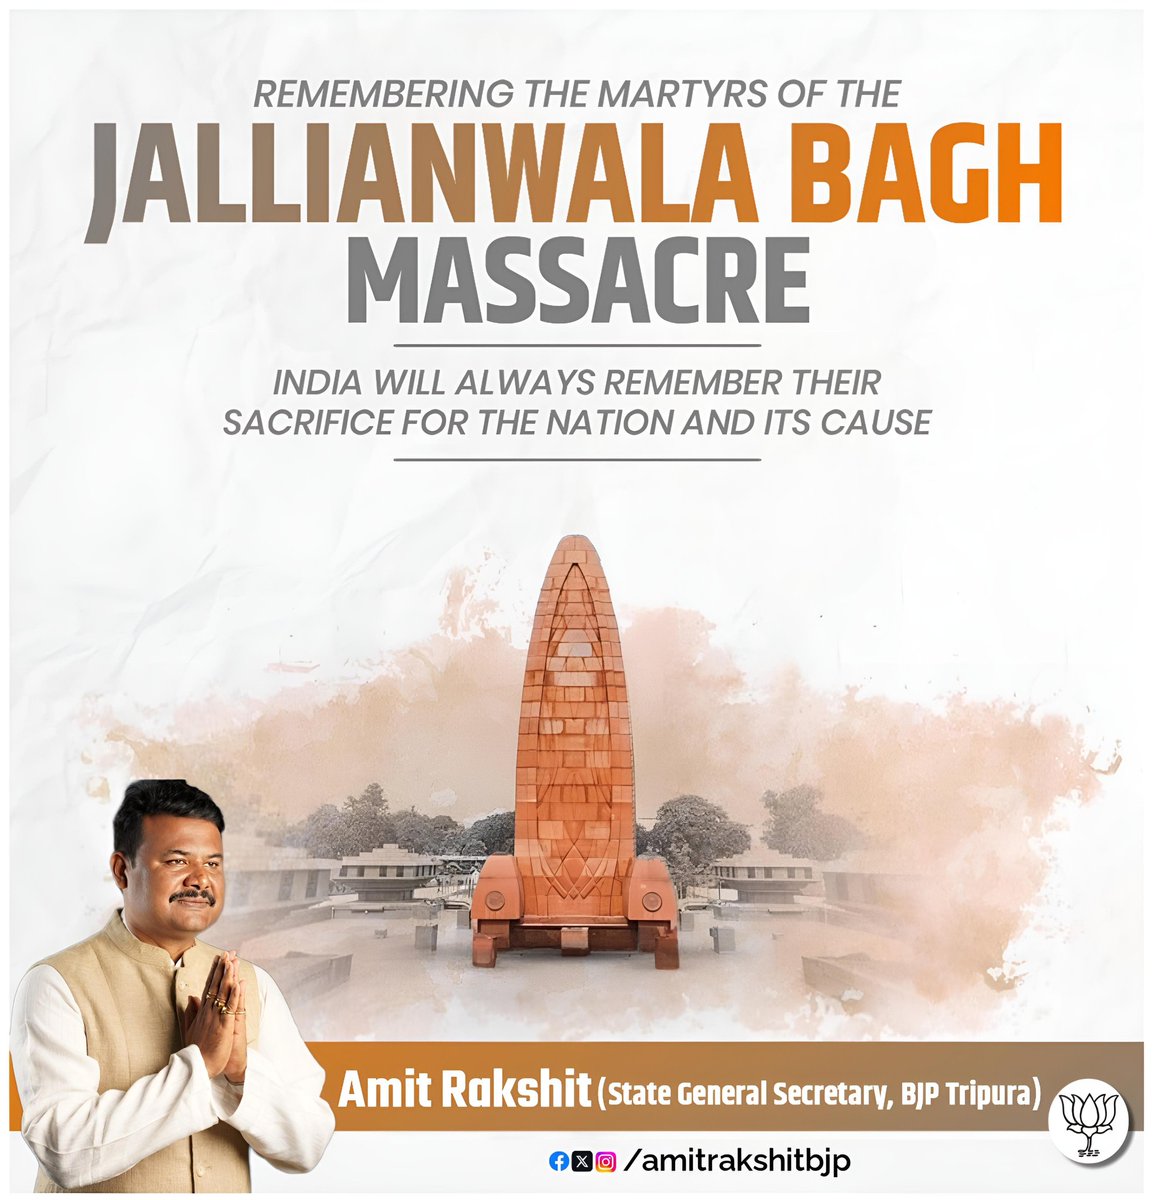 Today, we solemnly remember the victims of the Jallianwala Bagh massacre.

This tragic event serves as a reminder of the atrocities committed during colonial rule. Let's honor their memory by striving for a world where justice and peace prevail! #jallianwalabagh